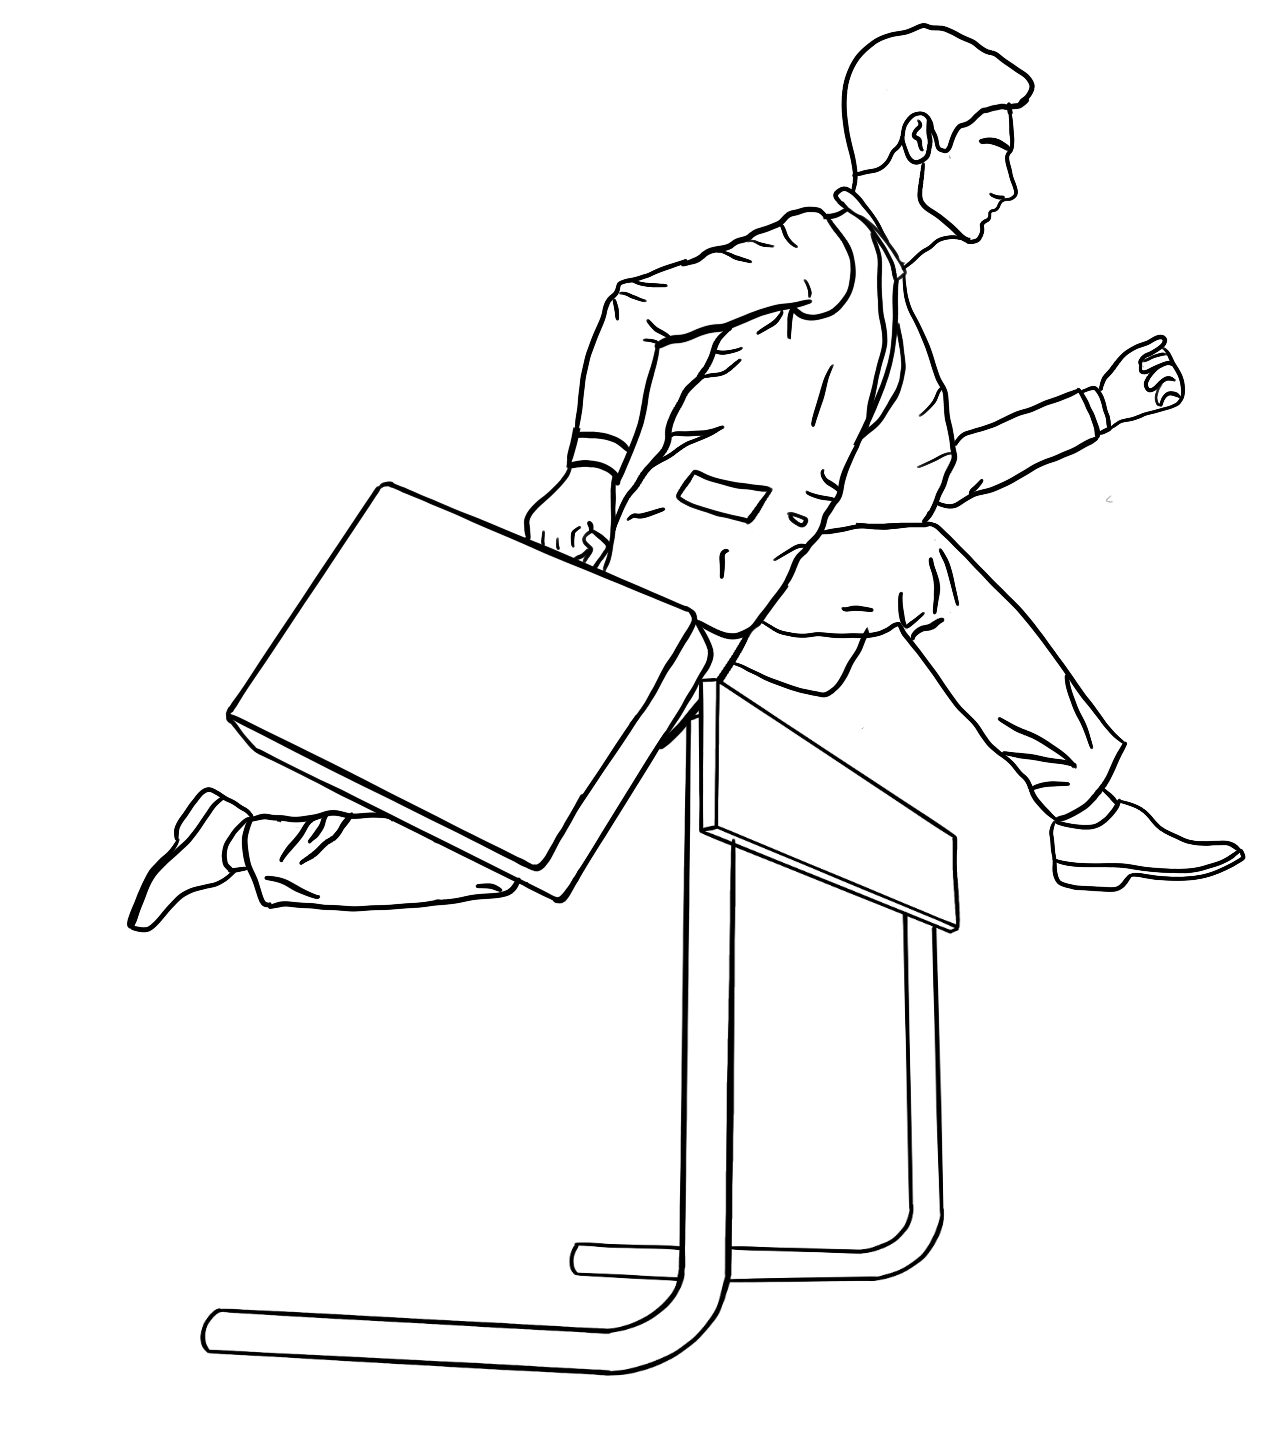 Drawing of a man in a business suit jumping over a hurdle